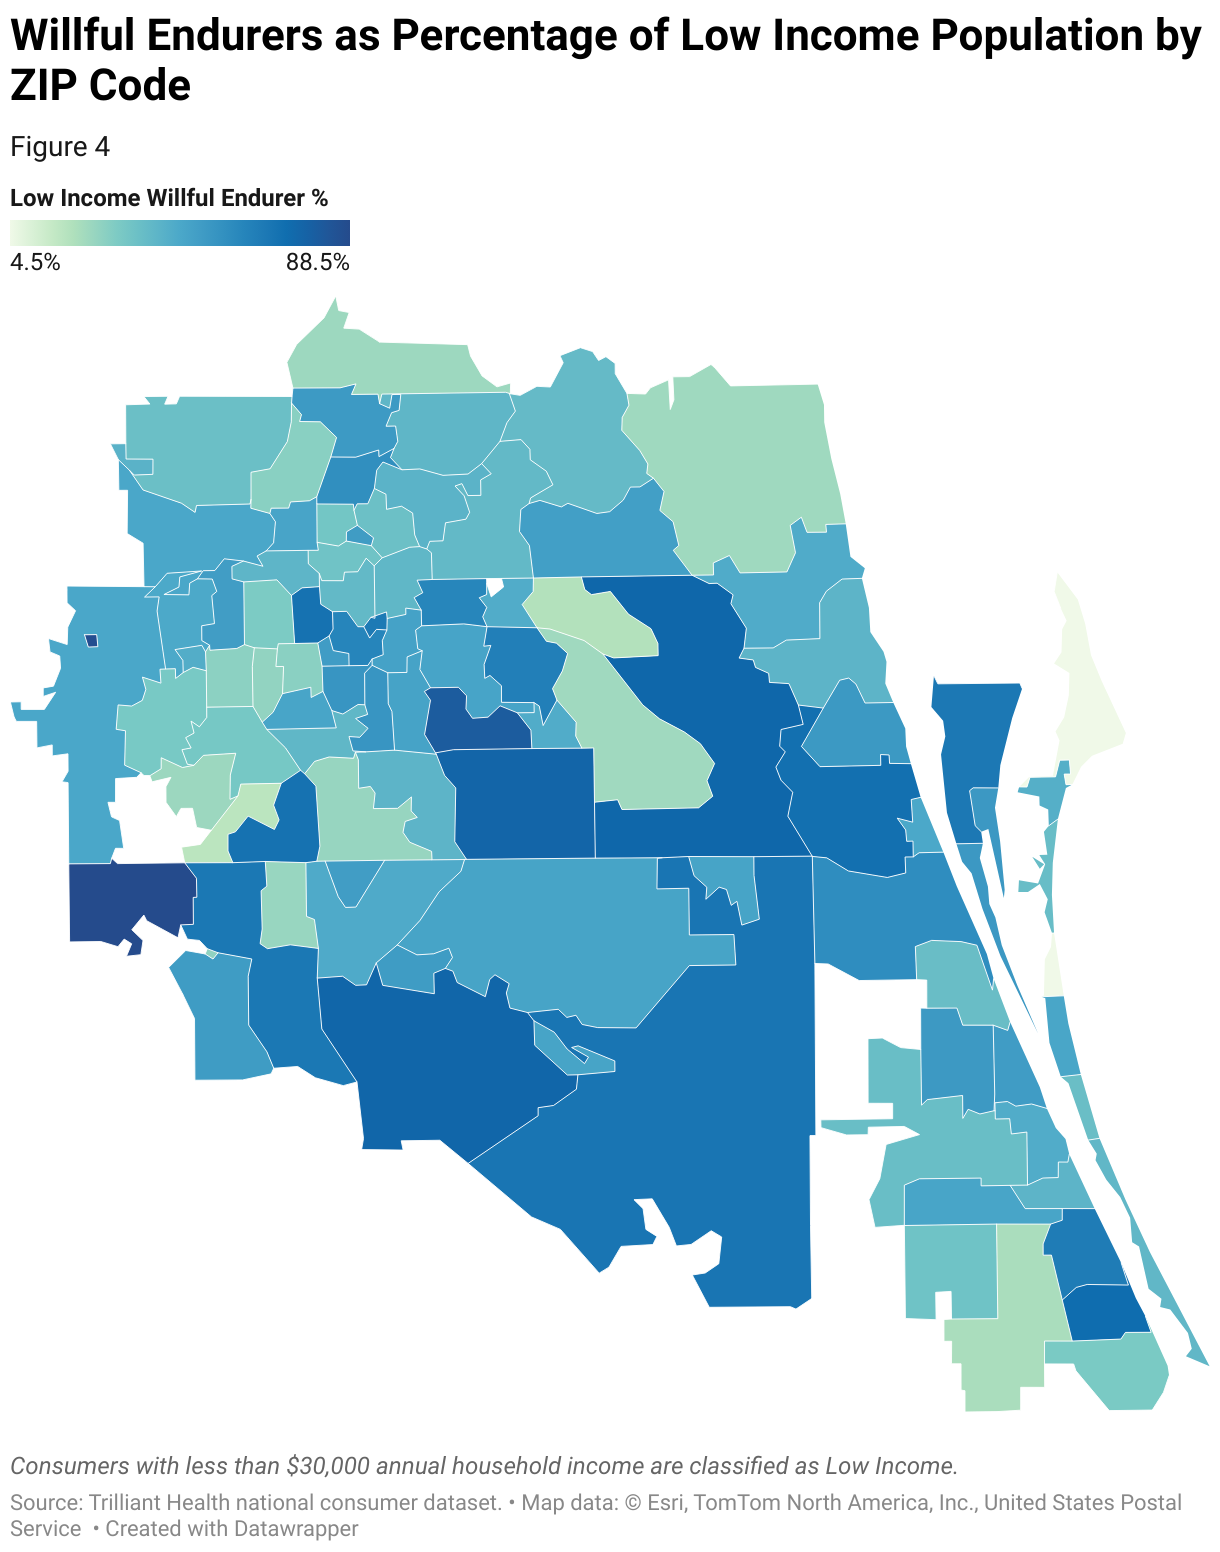 A map of Florida’s Medicaid Region 7 shows the percentage of the low-income population in each ZIP Code who are Willful Endurers.